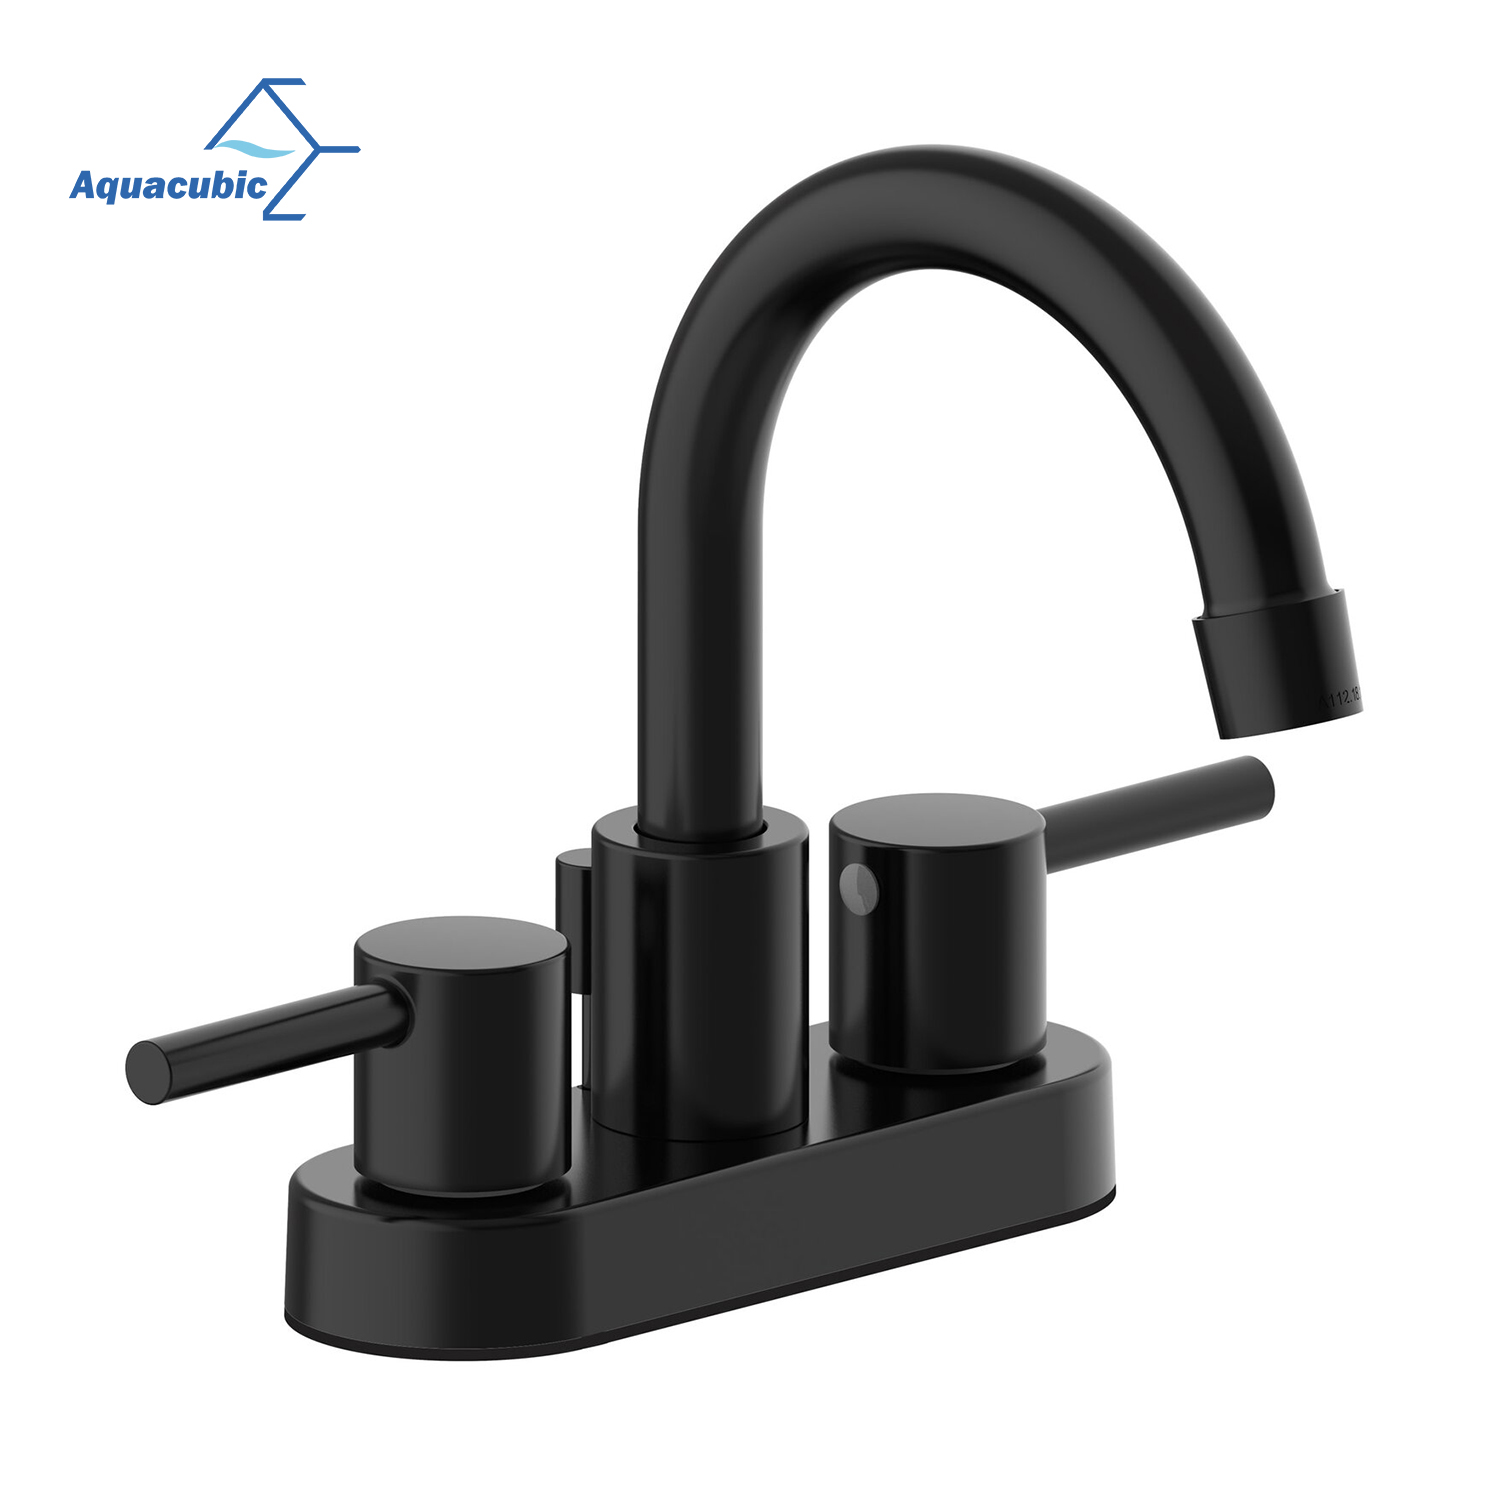 Hot Selling Two Handle Revolving Basin Hot and Cold Water Centerset Faucet